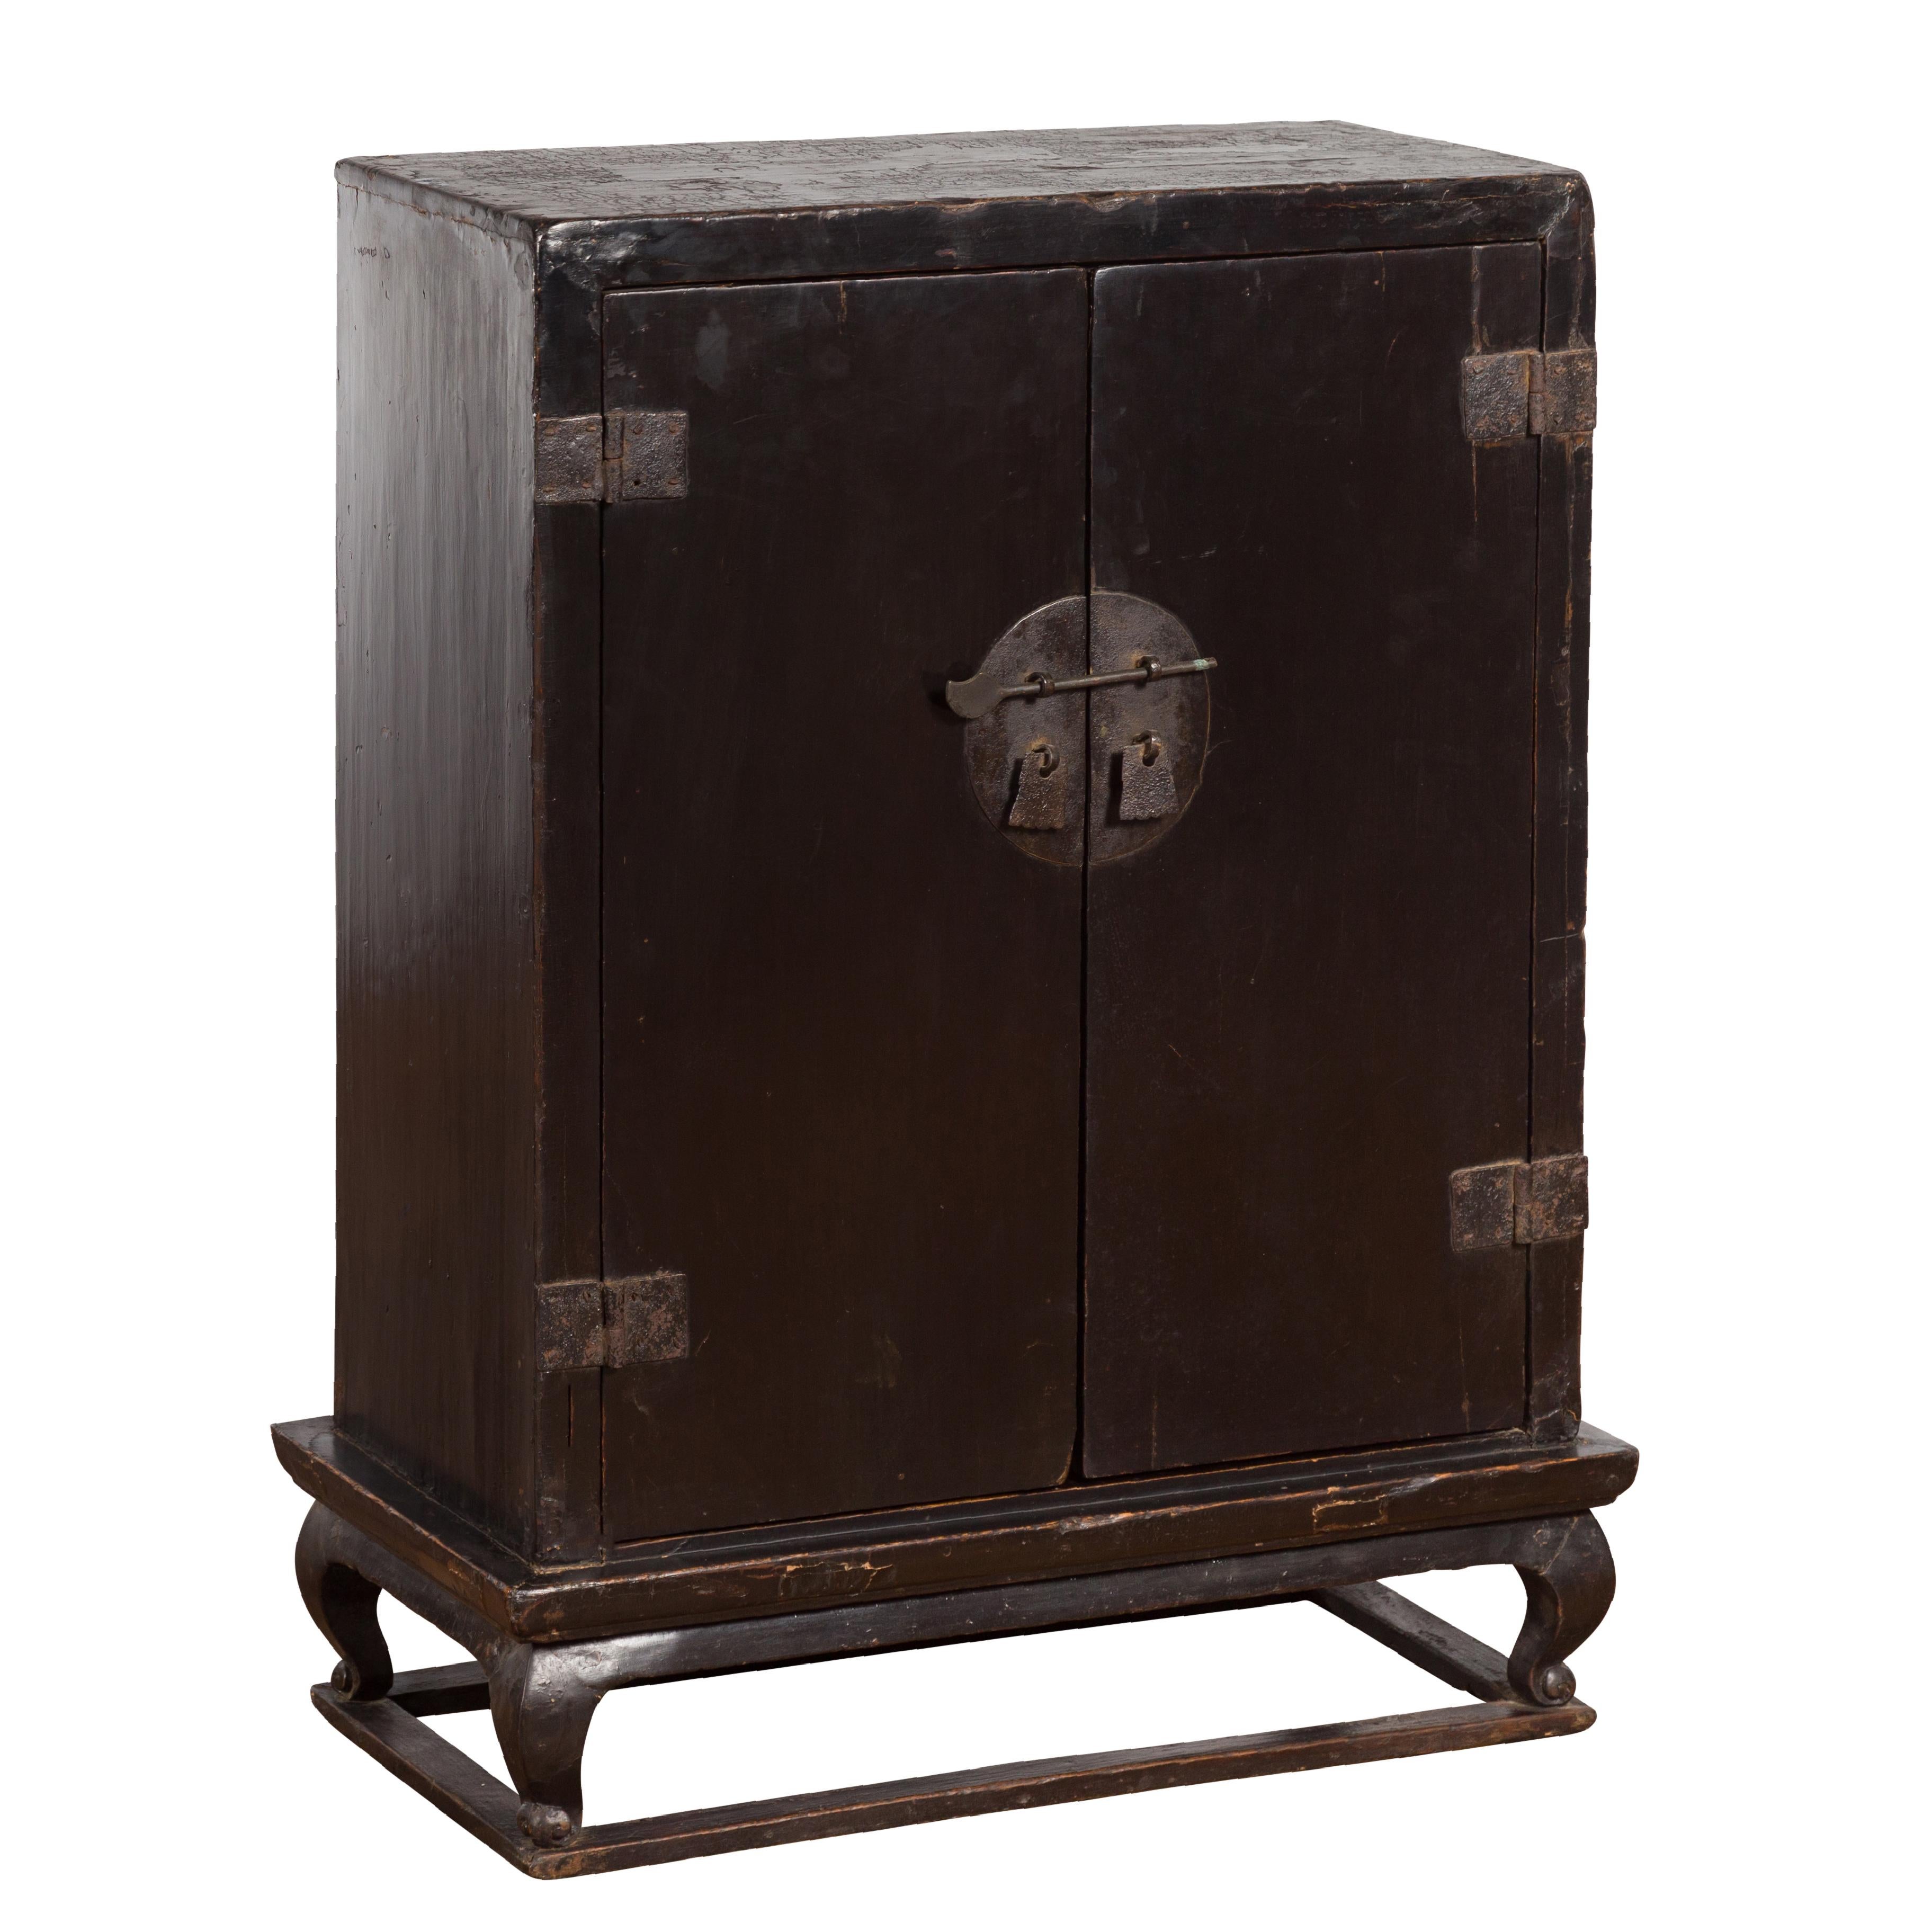 An antique Chinese dark brown lacquer altar shrine from the early 20th century, with carved giltwood motifs. Created in China during the early years of the 20th century, this dark brown lacquer cabinet features a linear silhouette raised on four